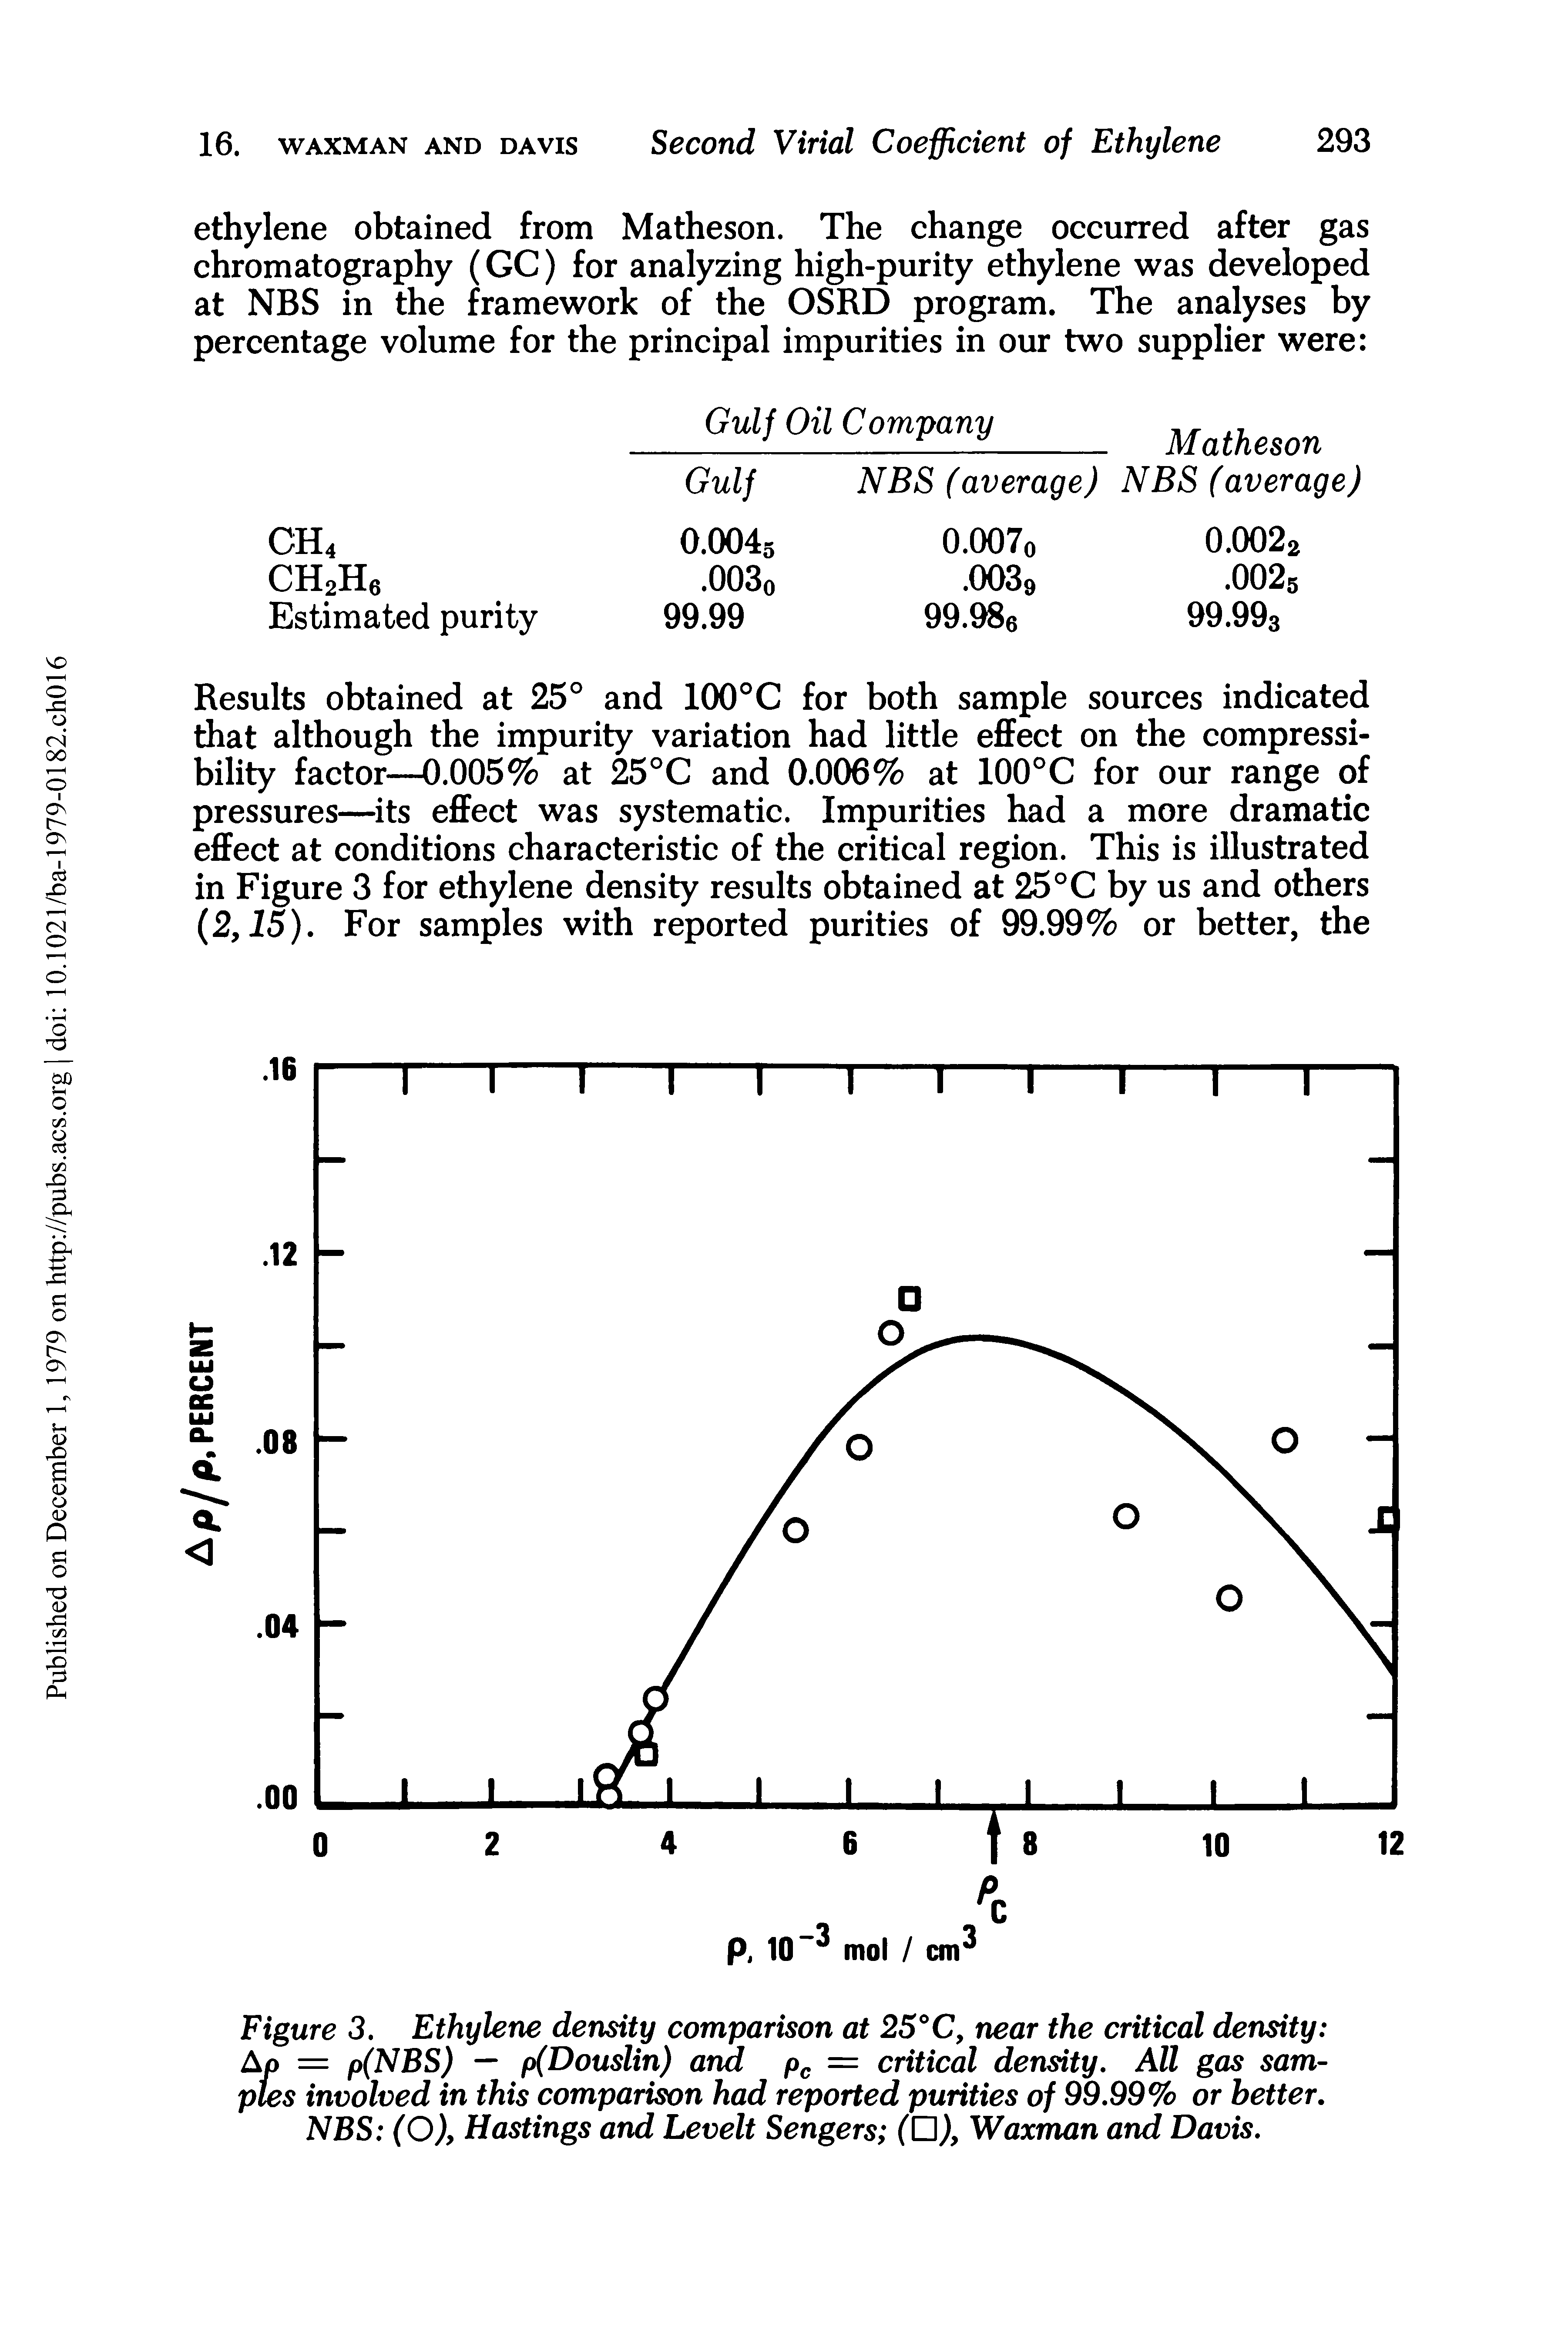 Figure 3. Ethylene density comparison at 25°C, near the critical density Ap = p(NBS) — p(Douslin) and pc = critical density. All gas samples involved in this comparison had reported purities of 99.99% or better. NBS (O), Hastings and Levelt Sengers ( ), Waxman and Davis.